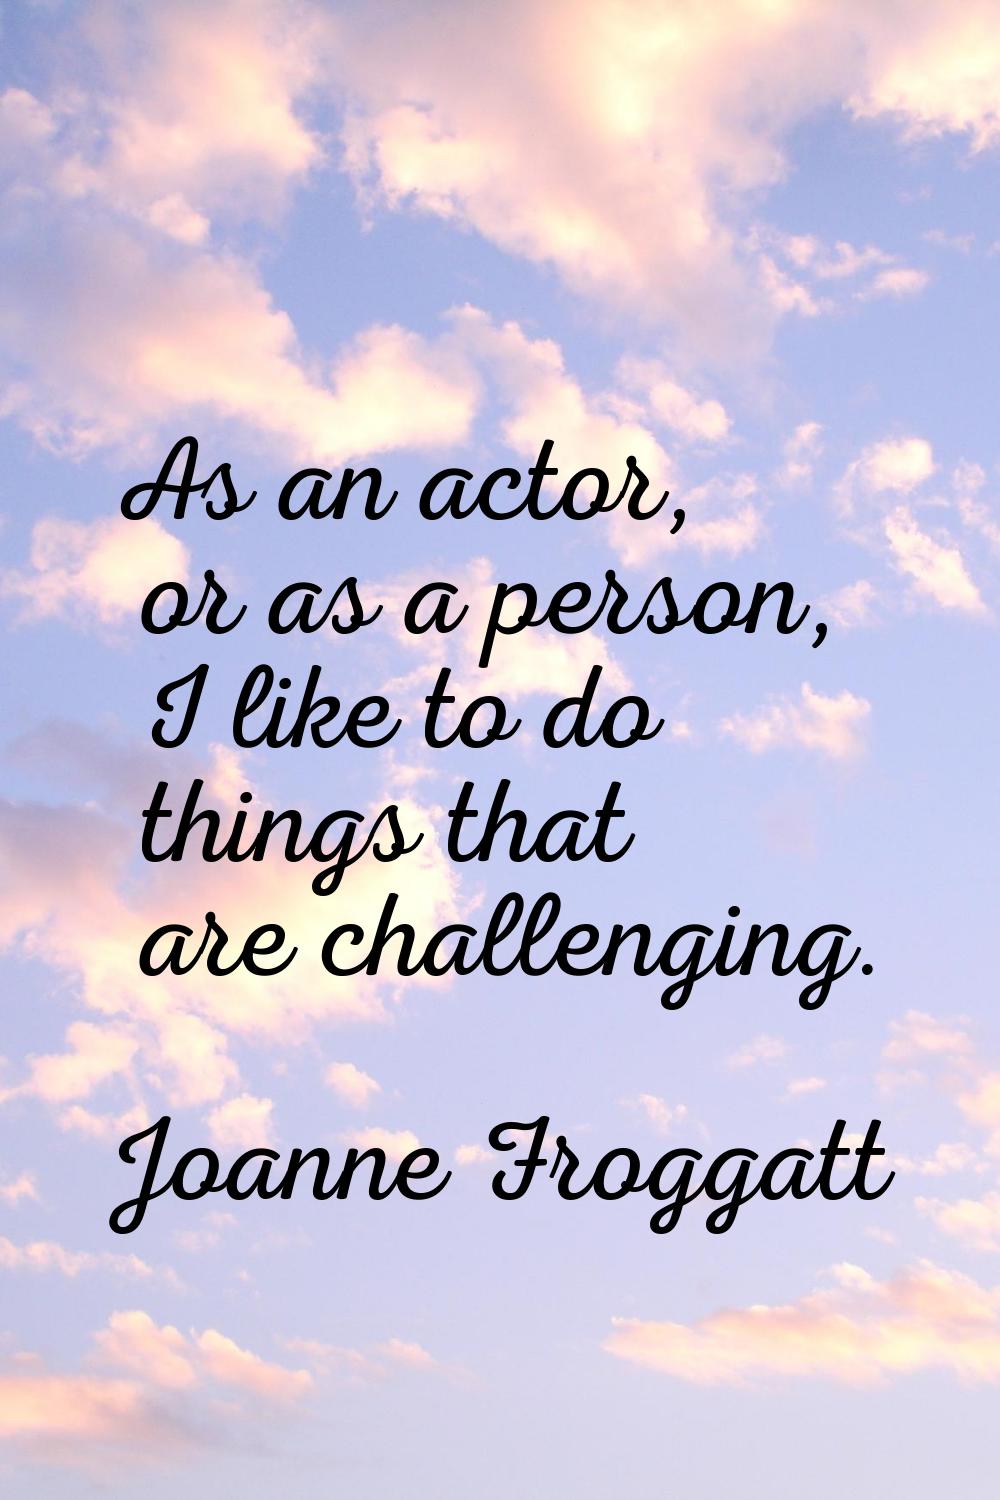 As an actor, or as a person, I like to do things that are challenging.